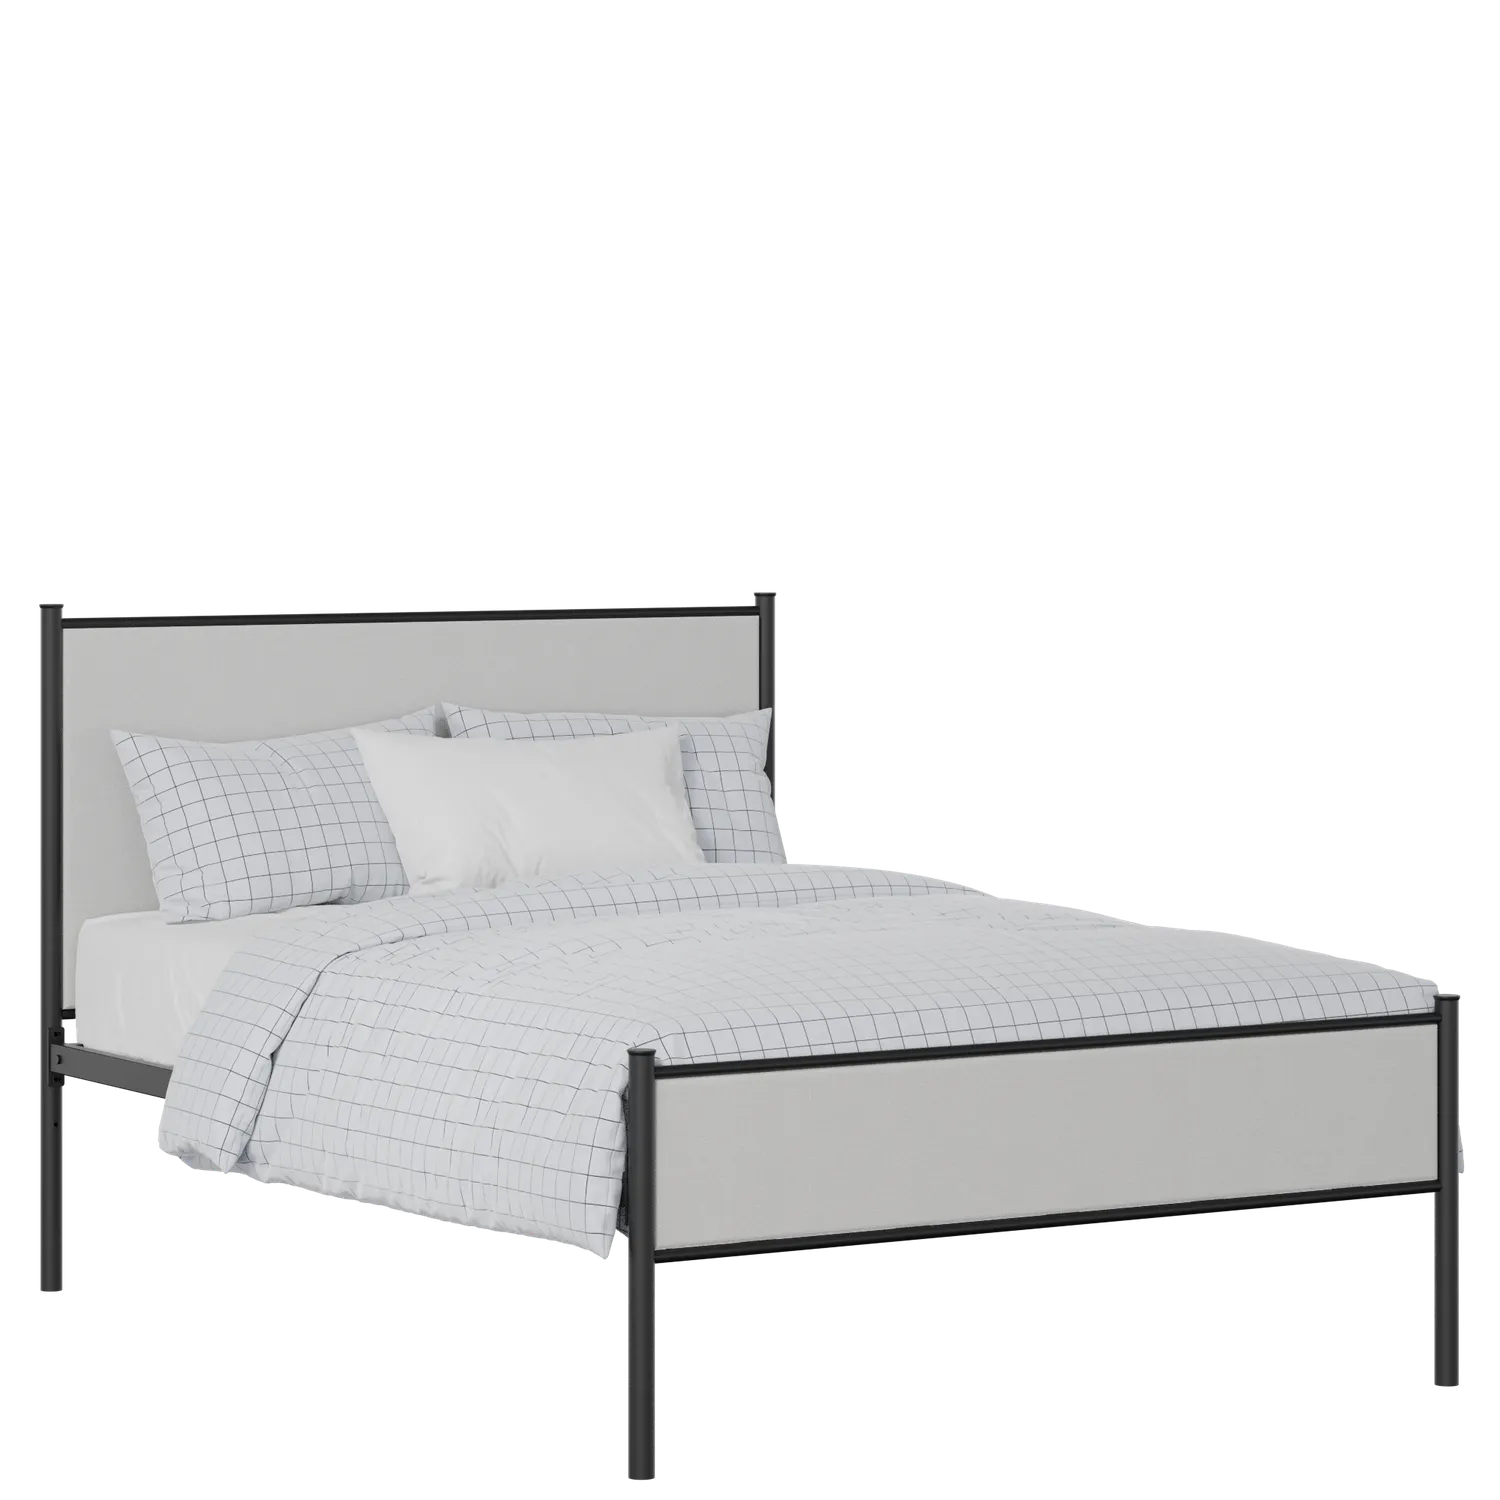 Brest Slim iron/metal upholstered bed in black with silver fabric